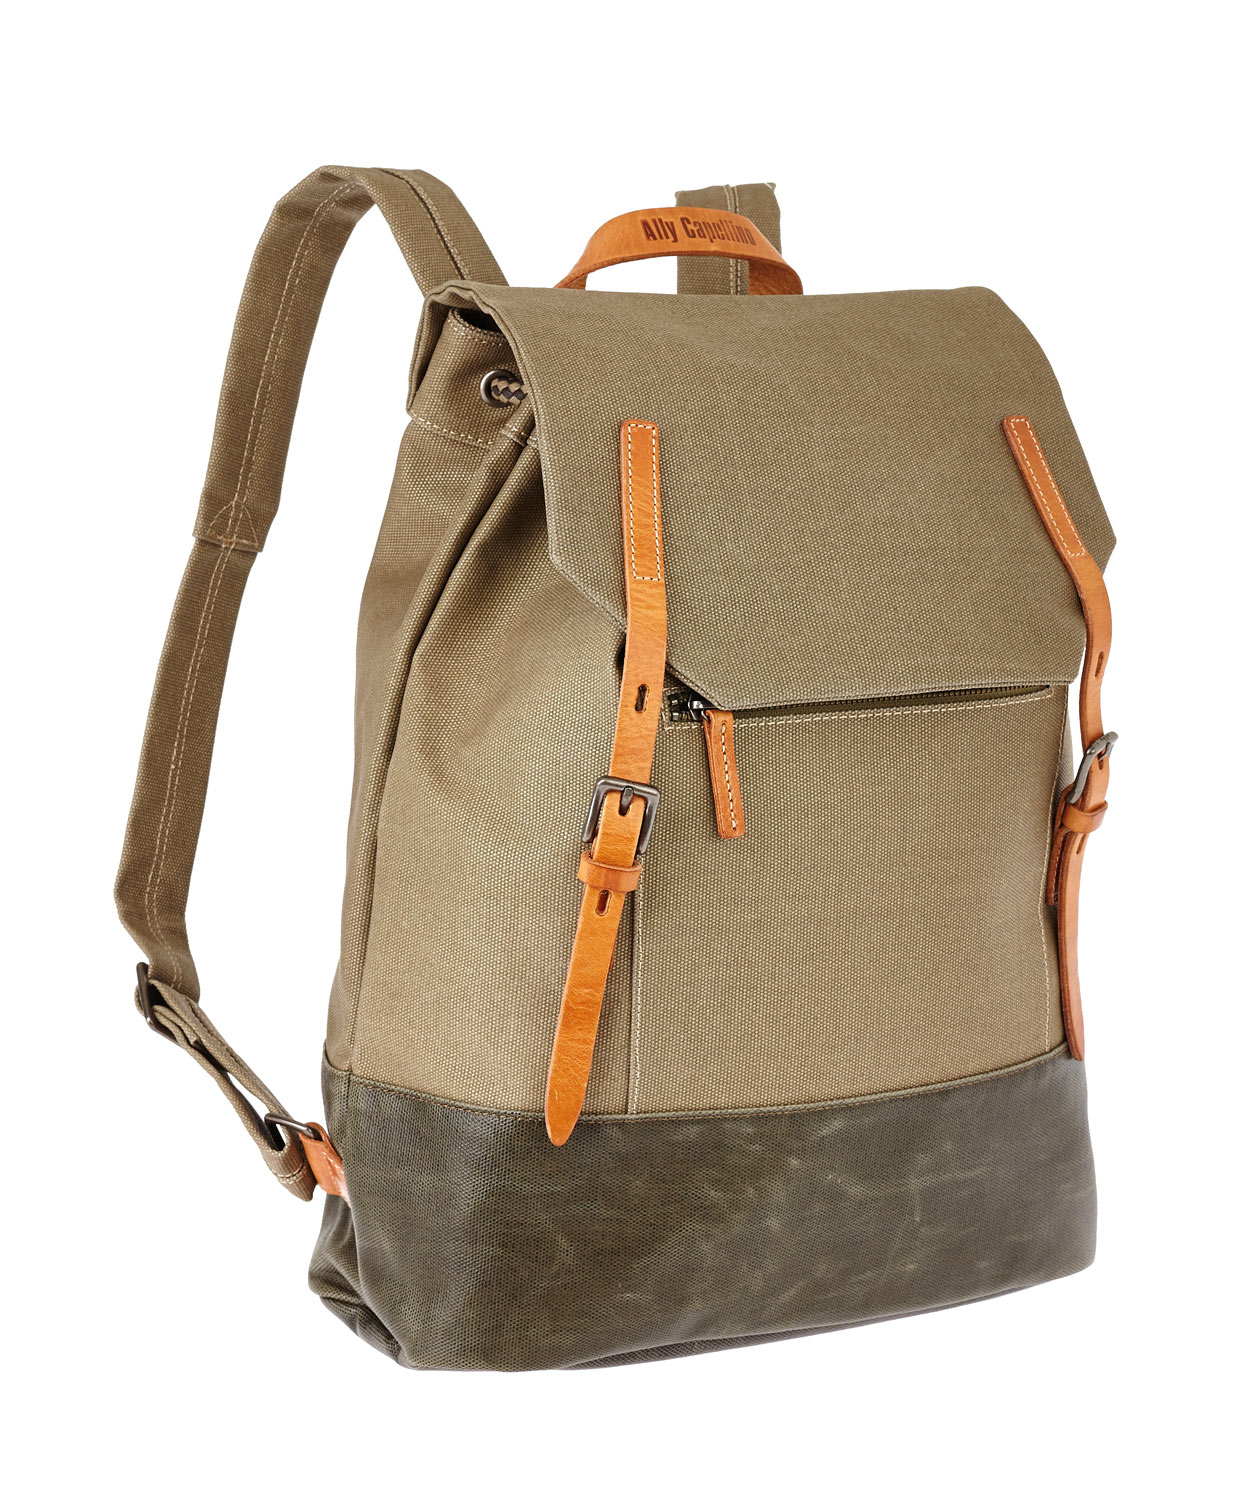 Ally Capellino Khaki Dean Waxed Canvas Backpack in Green for Men - Lyst